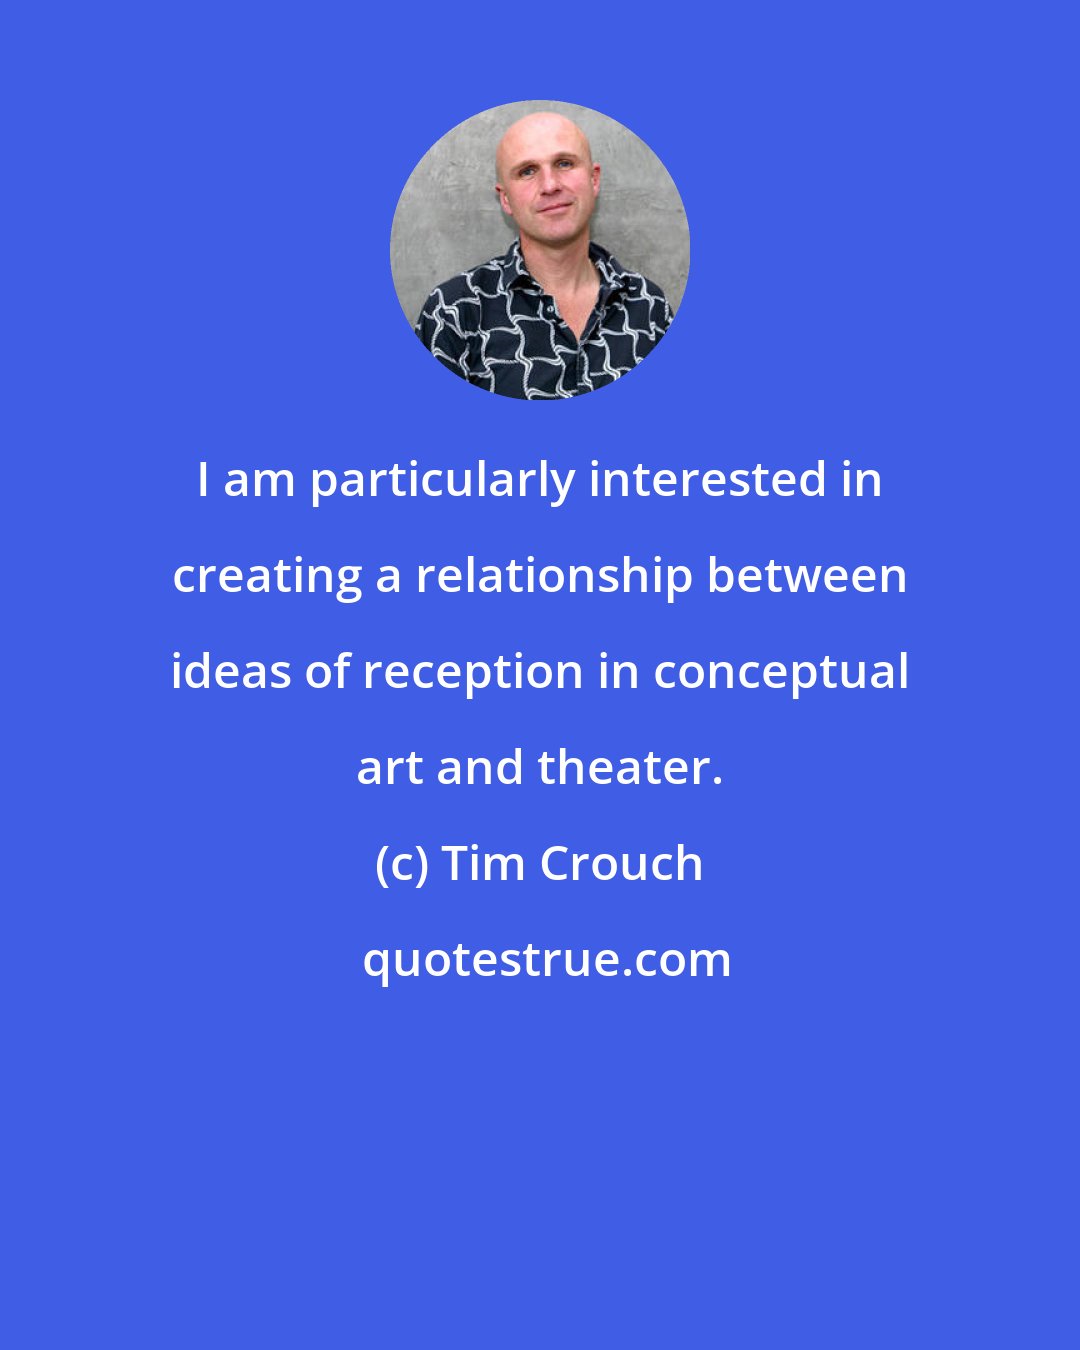 Tim Crouch: I am particularly interested in creating a relationship between ideas of reception in conceptual art and theater.